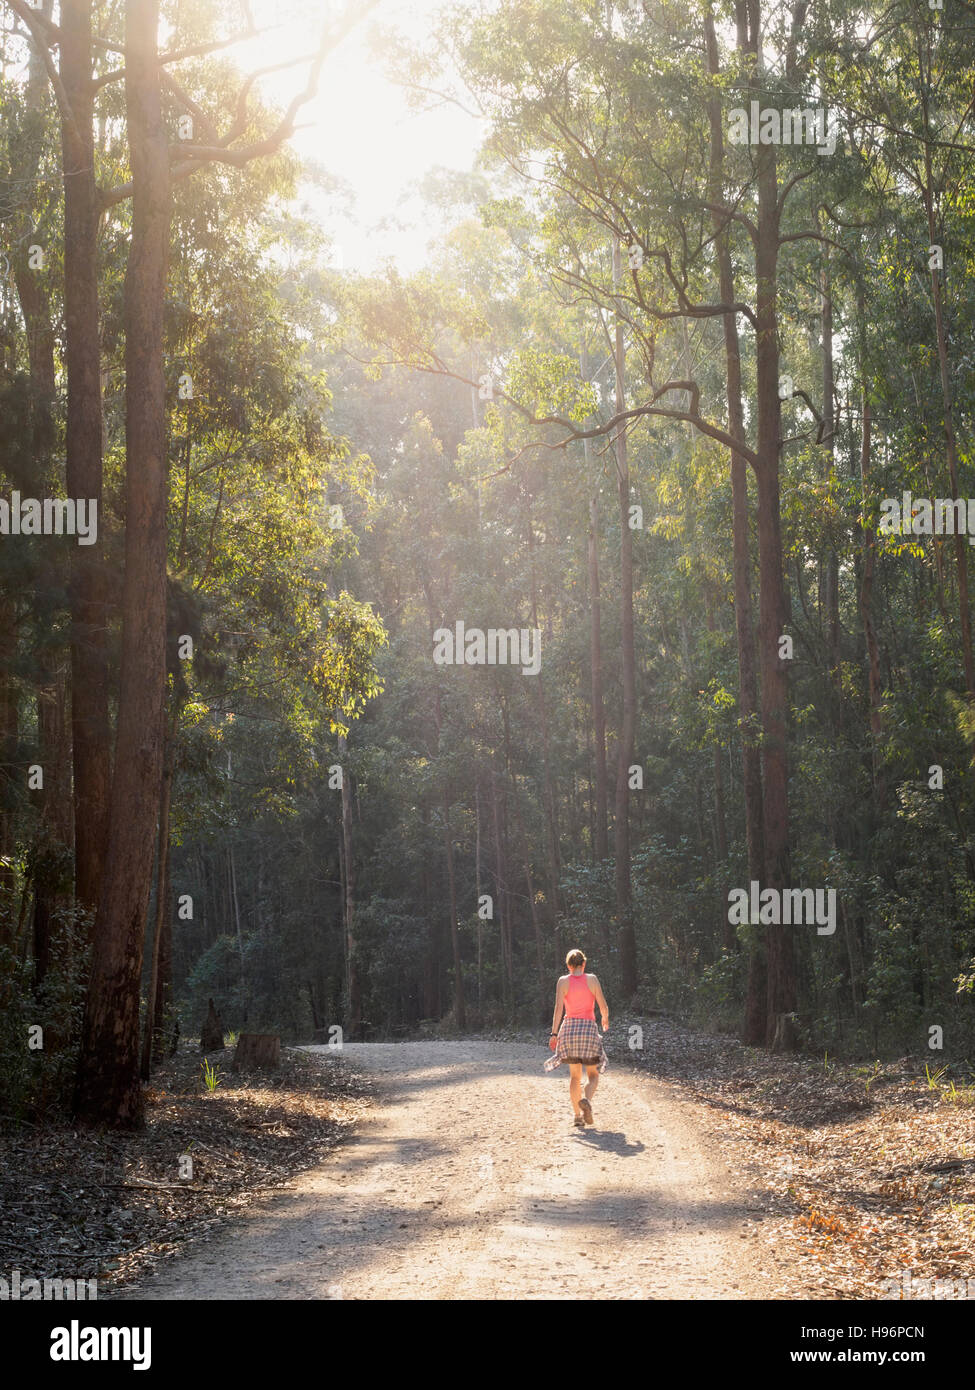 Australia, New South Wales, Port Macquarie, Rear view of mature woman walking along dirt road in forest Stock Photo